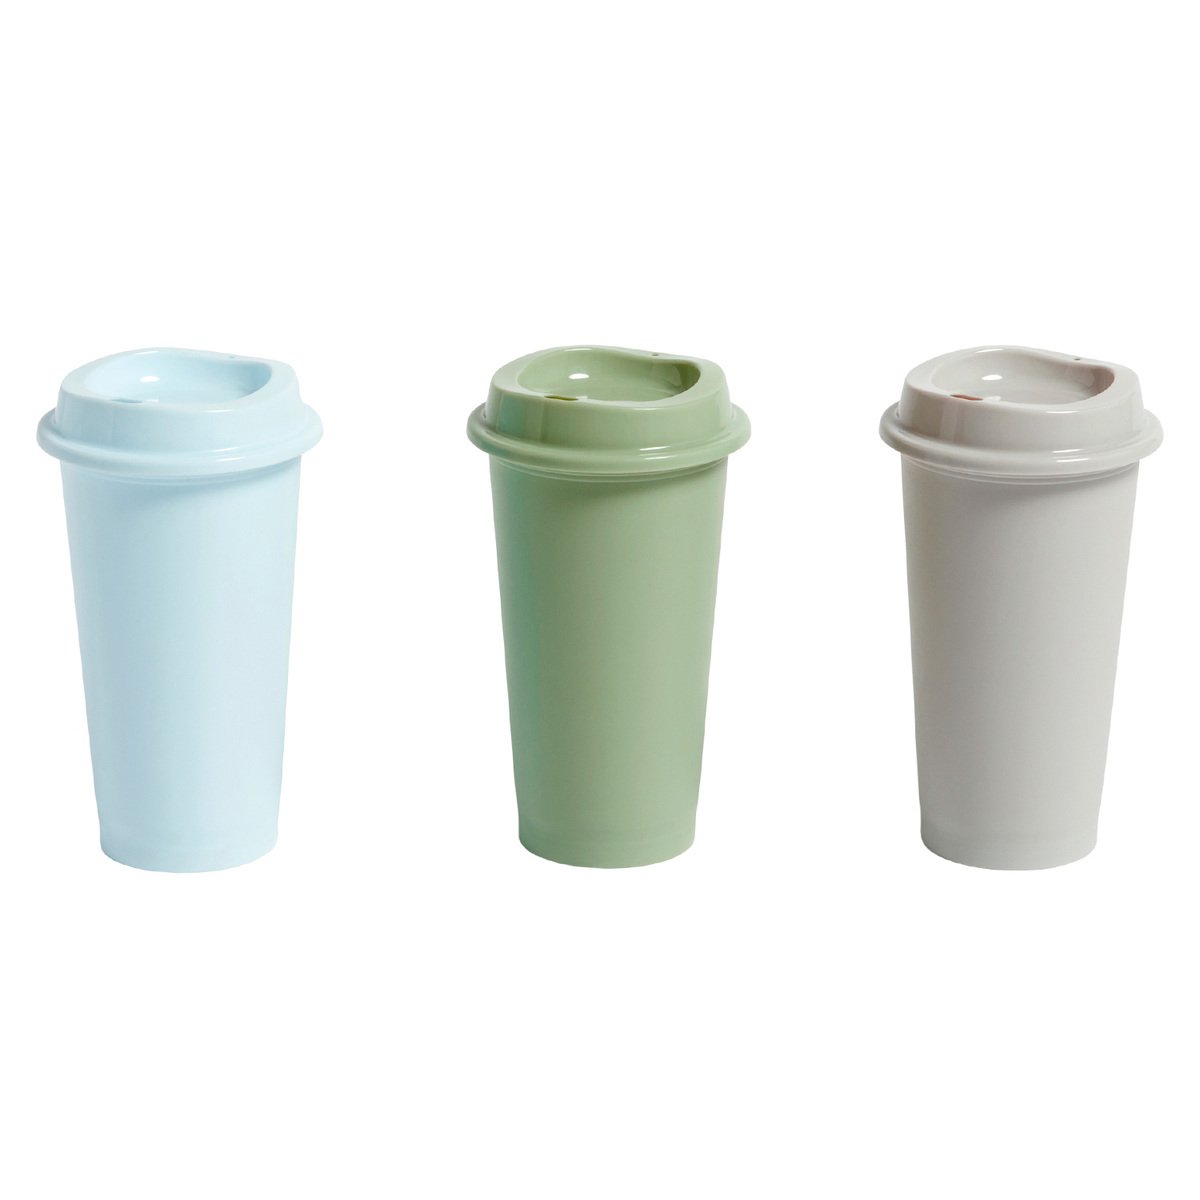 takeaway coffee cups with lids